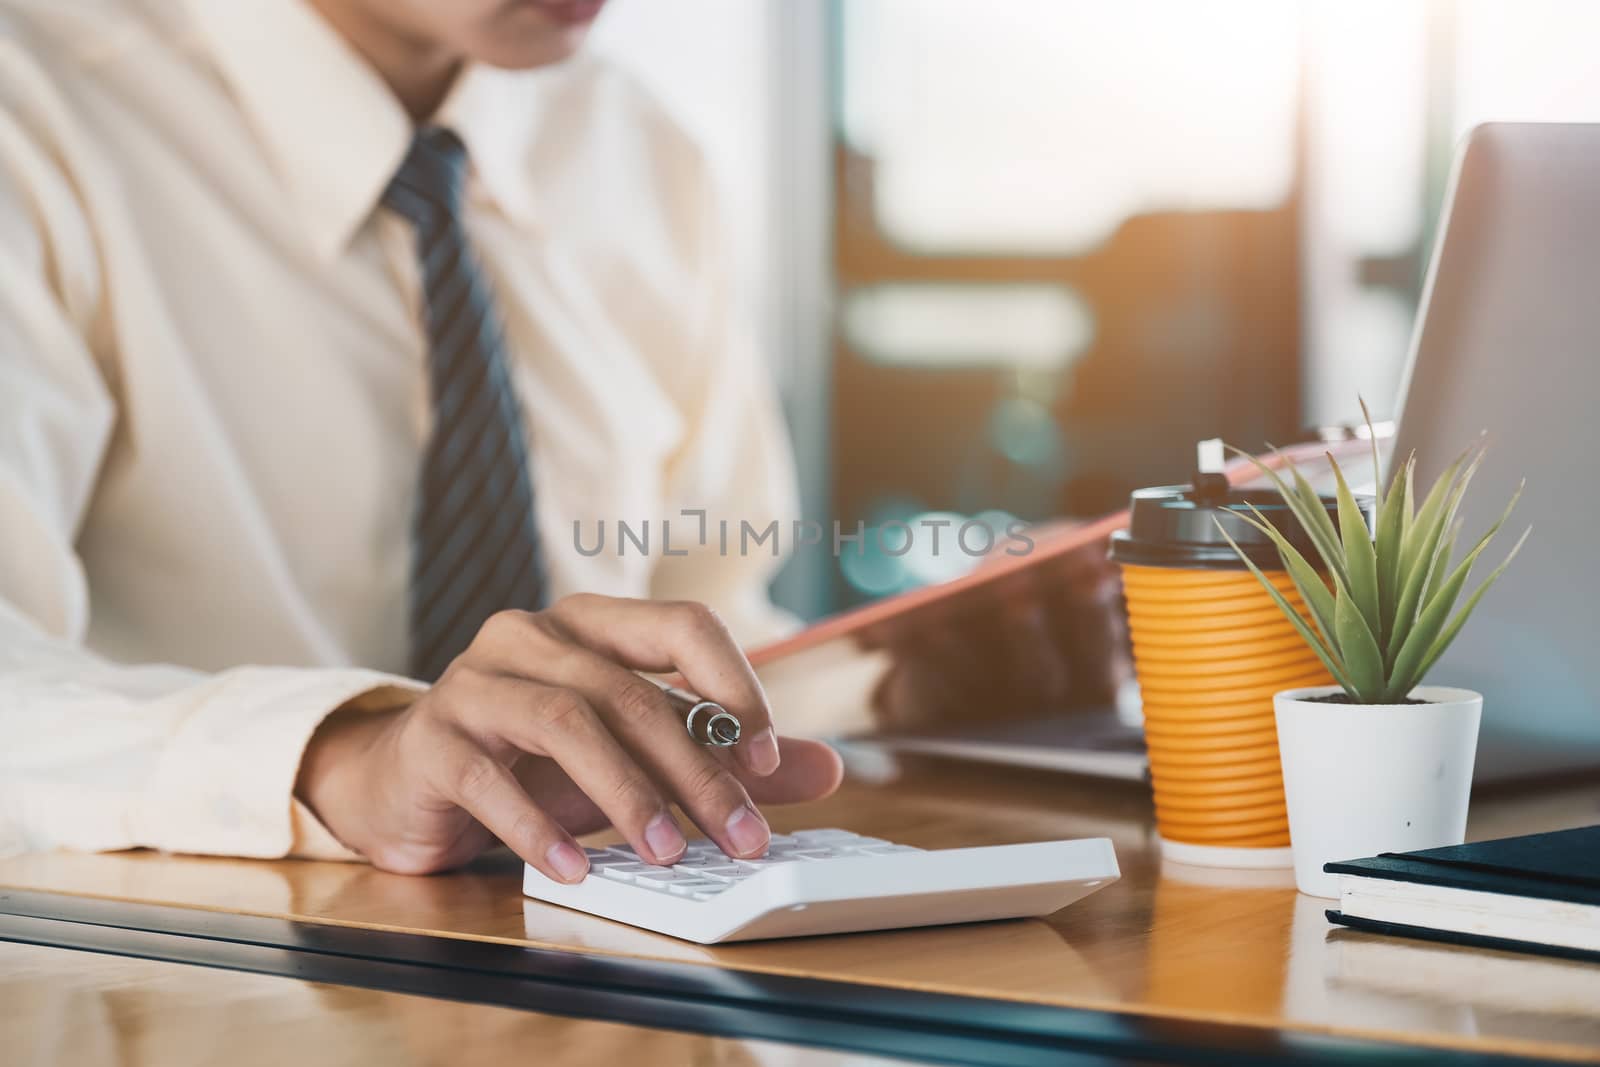 Close up of businessman or accountant hand holding pen working on calculator to calculate business data, accountancy document and laptop computer at office, business concept.